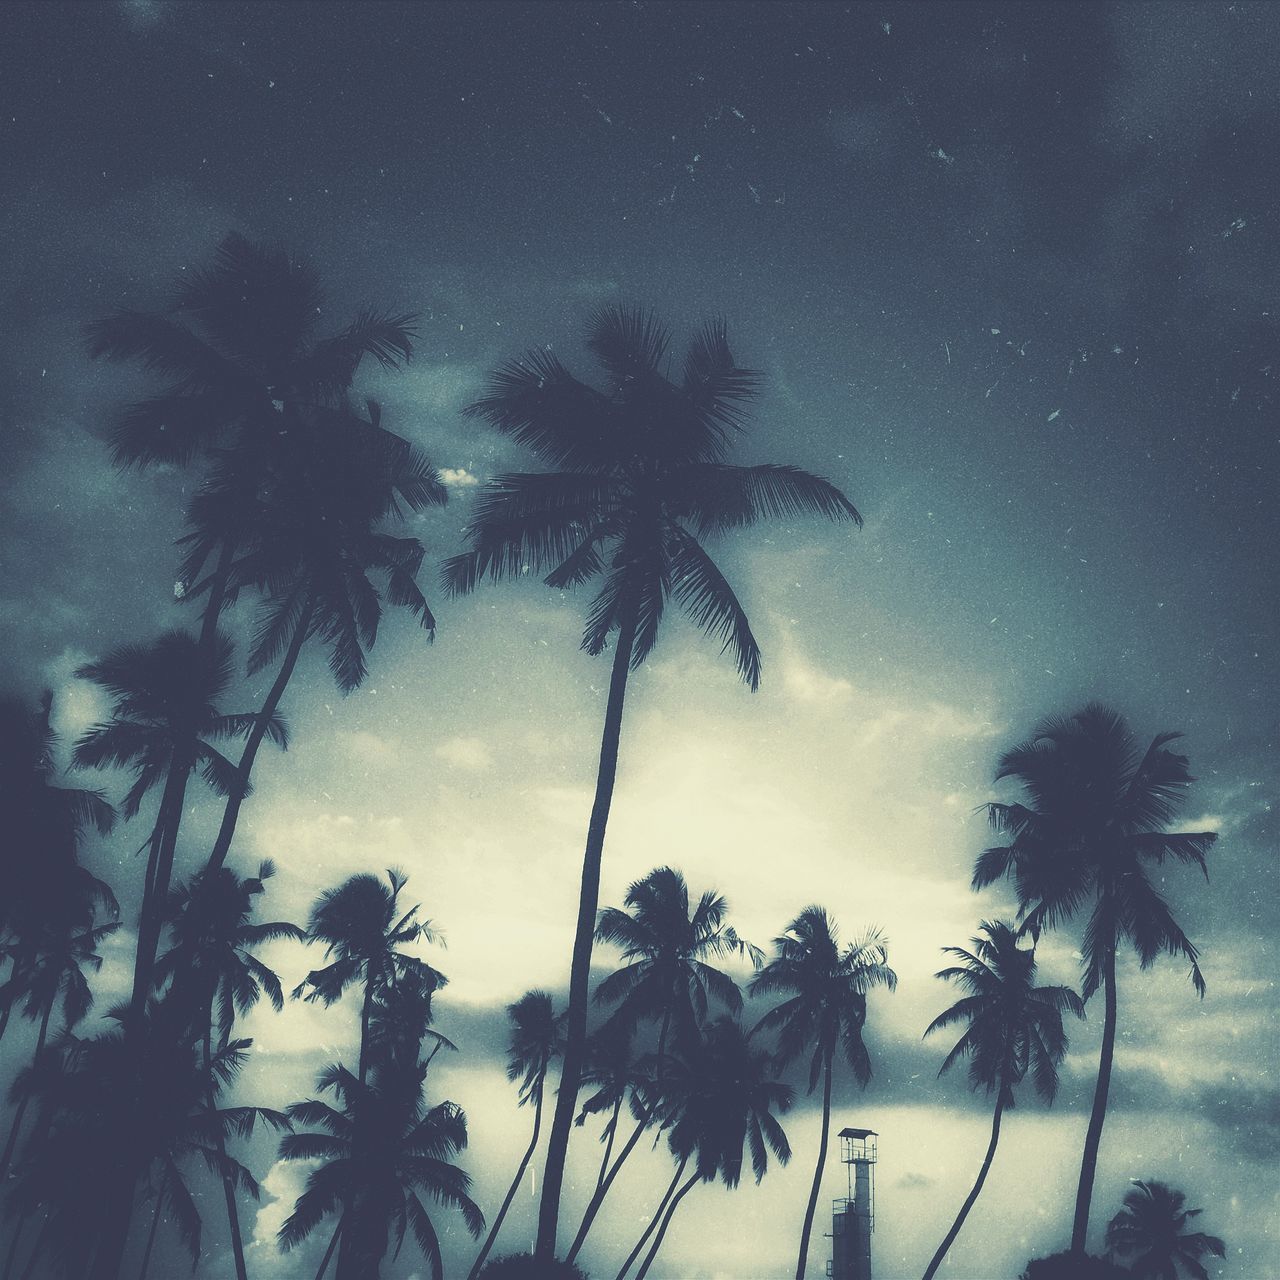 tree, palm tree, low angle view, silhouette, sky, tranquility, beauty in nature, scenics, nature, growth, tranquil scene, night, tree trunk, dusk, outdoors, cloud - sky, branch, no people, idyllic, tall - high